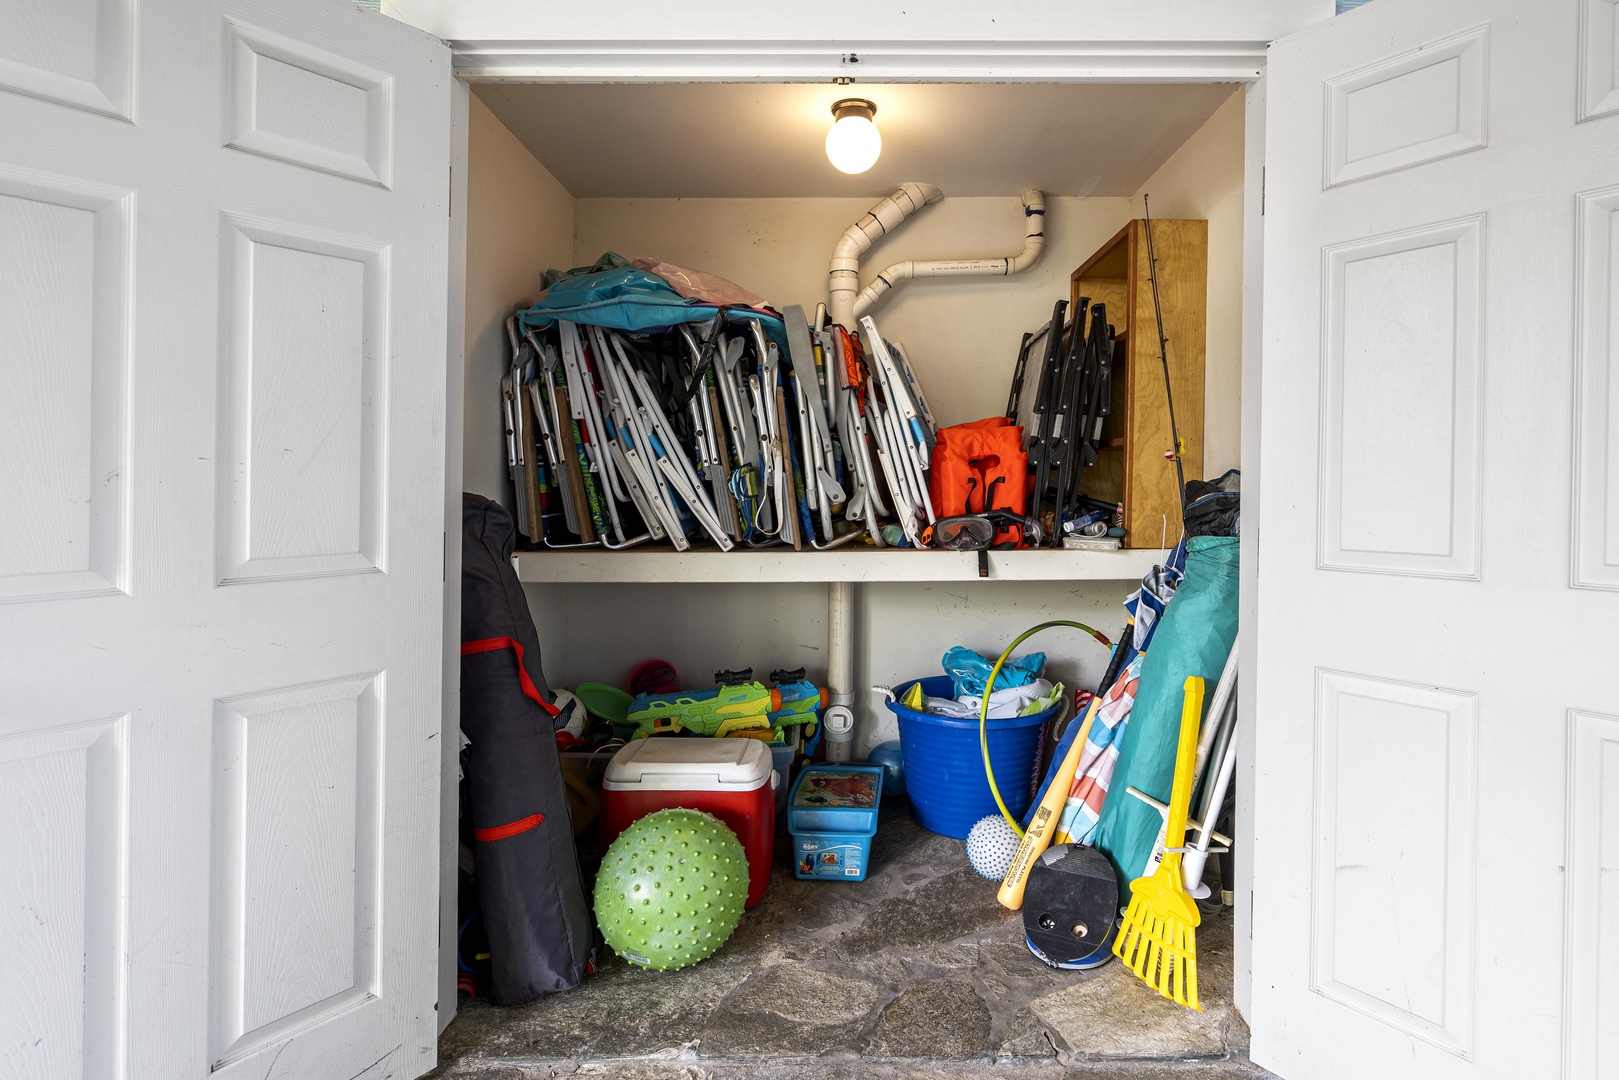 Kailua Kona Vacation Rentals, Kona Blue - Beach gear accumulated from prior guests / inventory not guaranteed